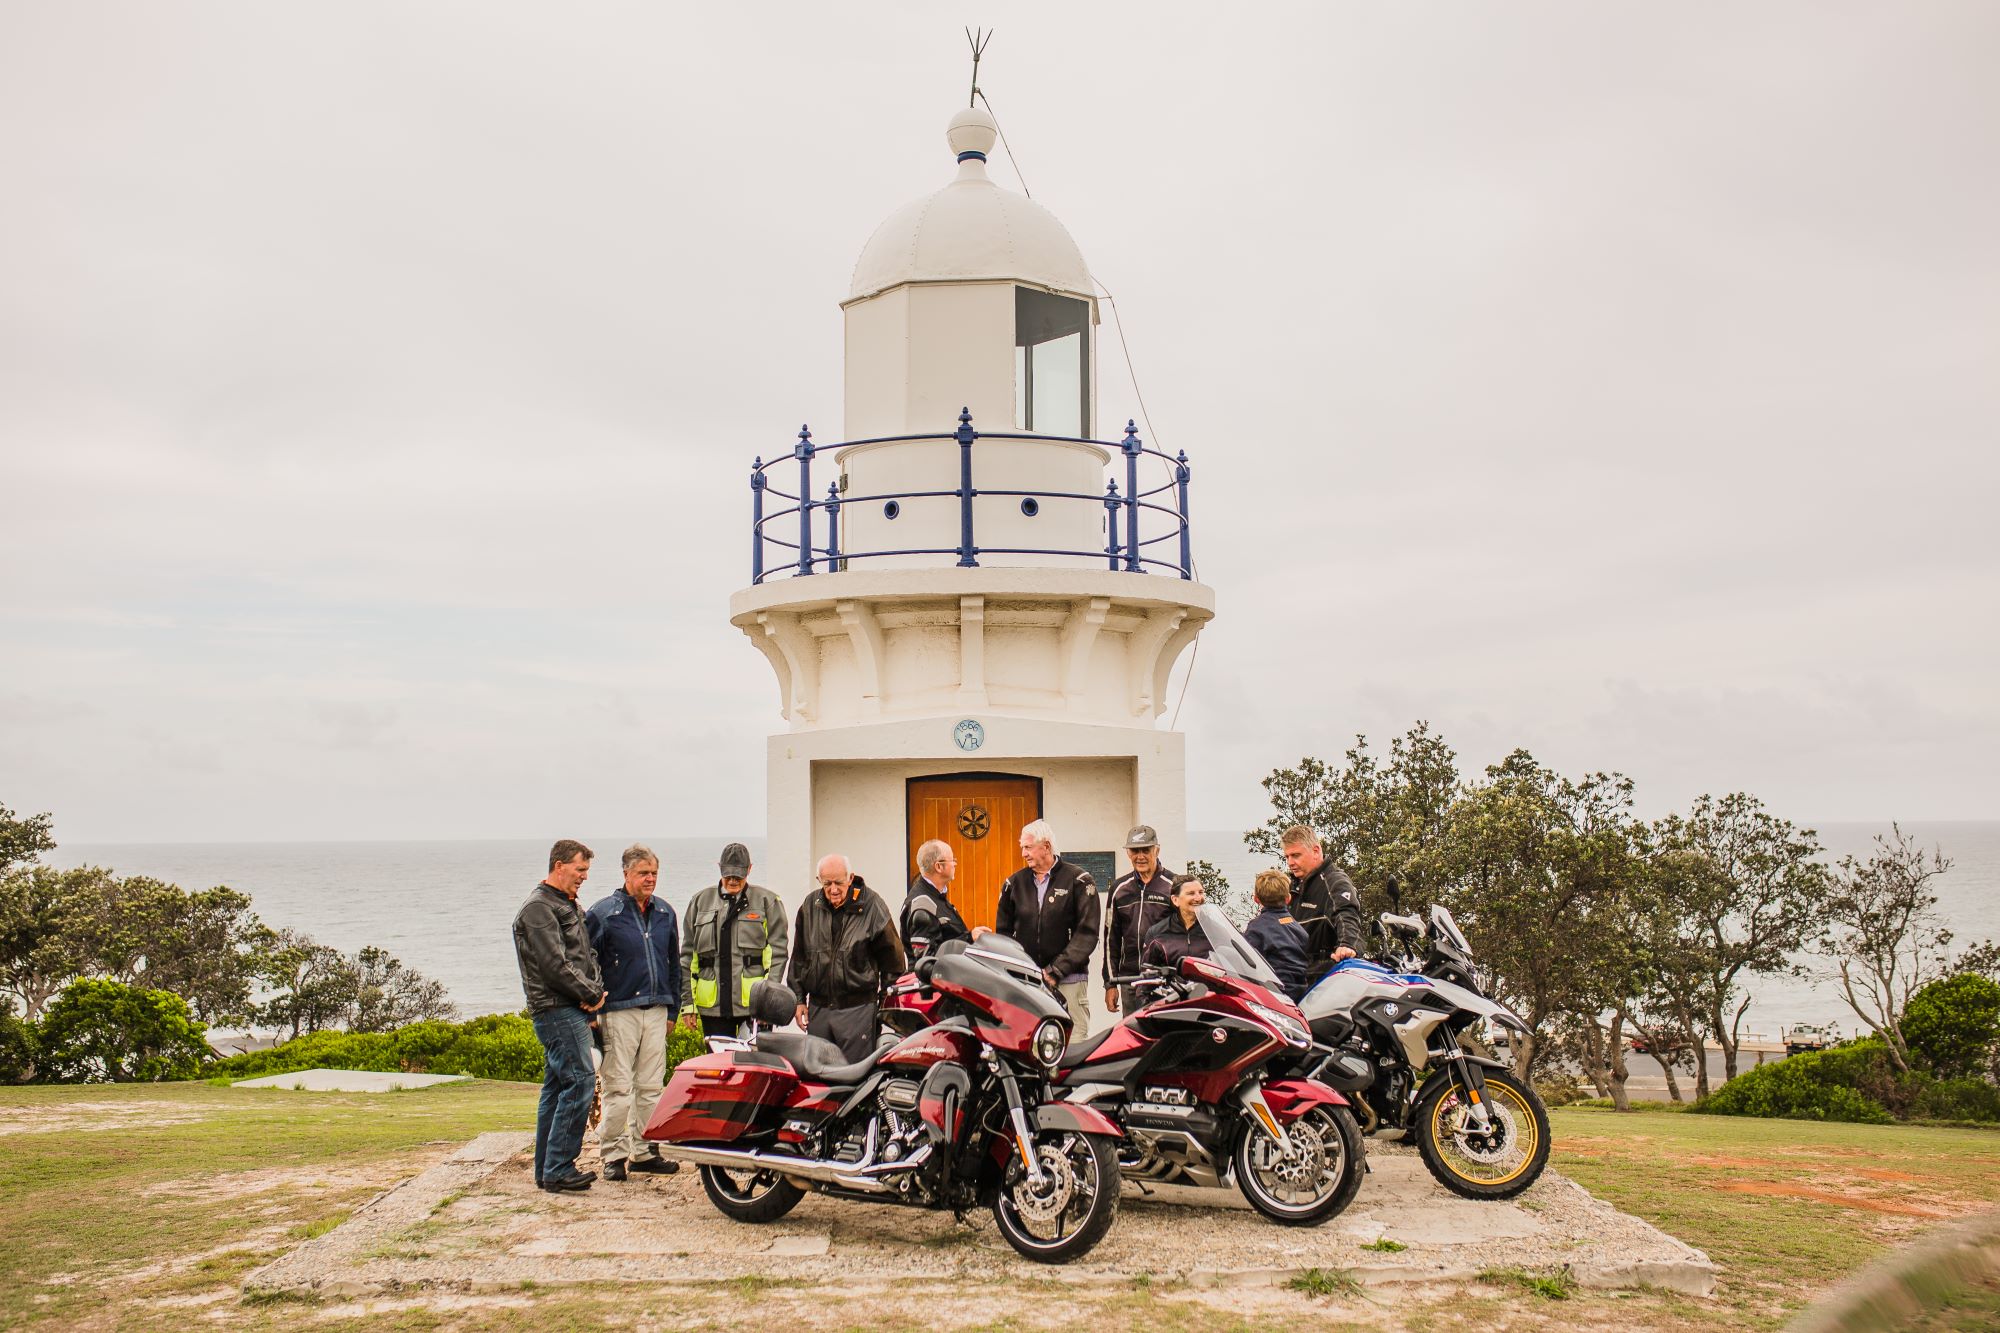 Motorbikes at the Lighthouse